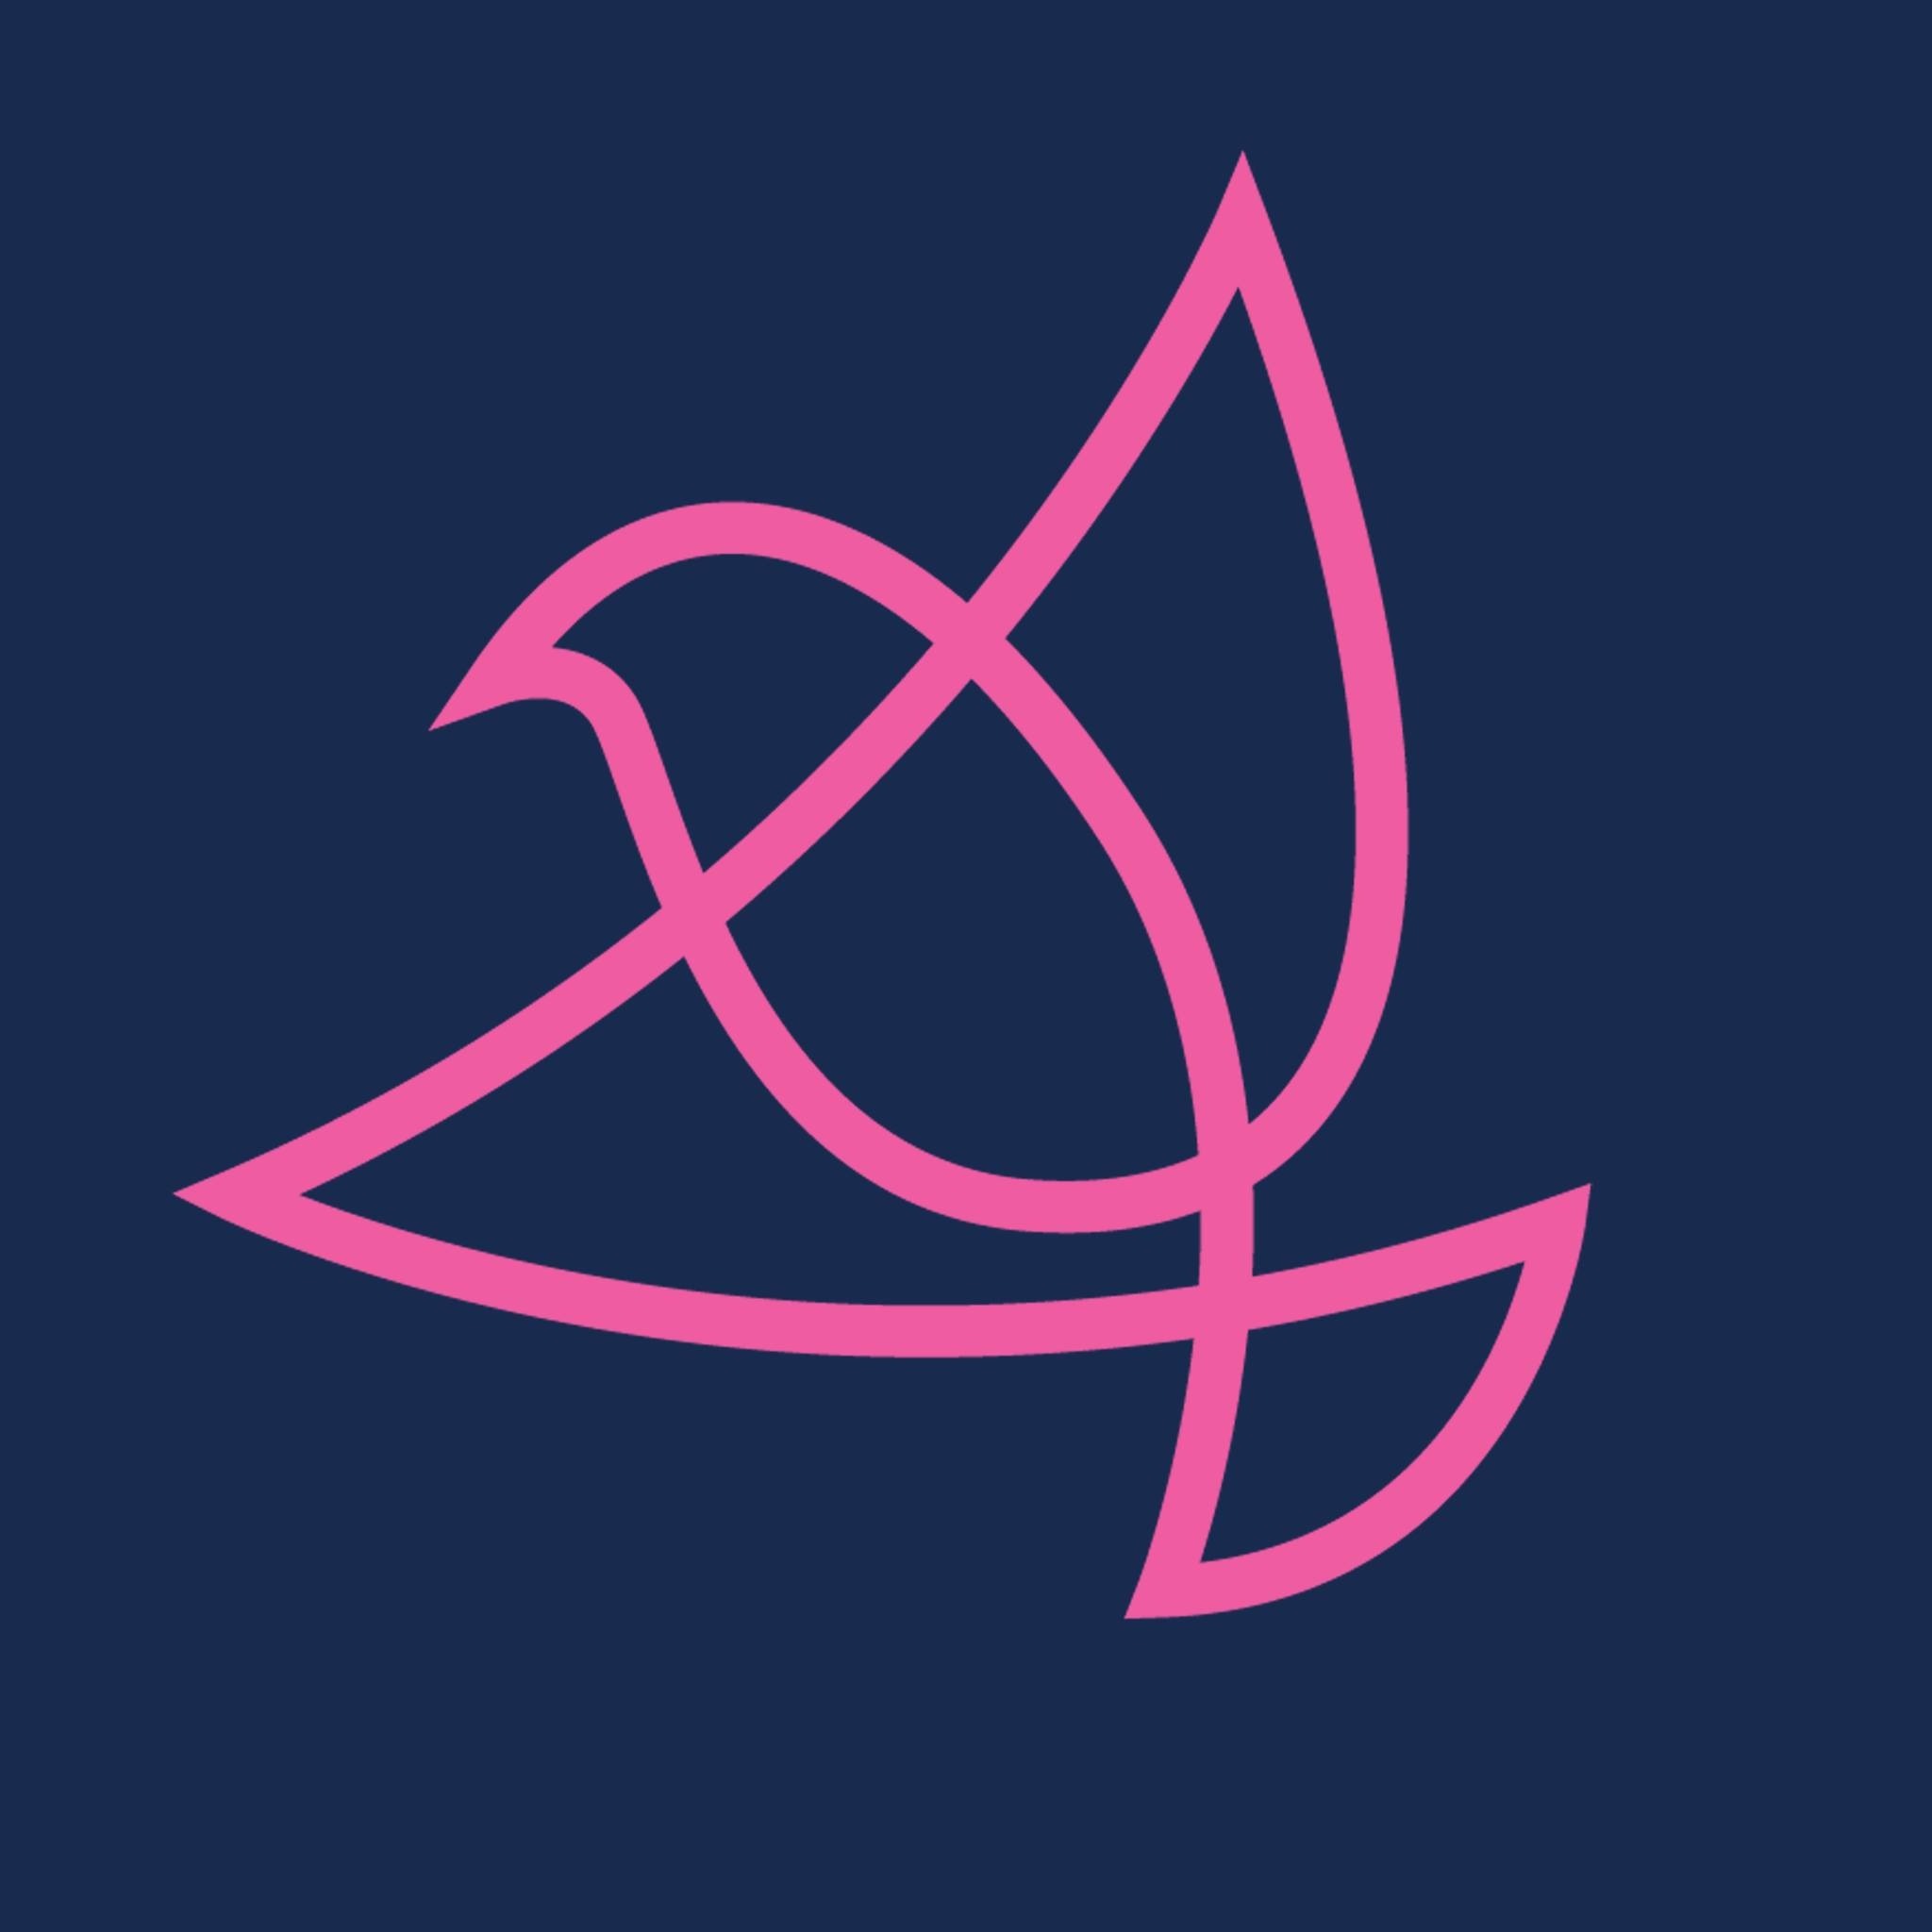 The Sparrow Digital Consulting logo: a pink bird on a blue background.